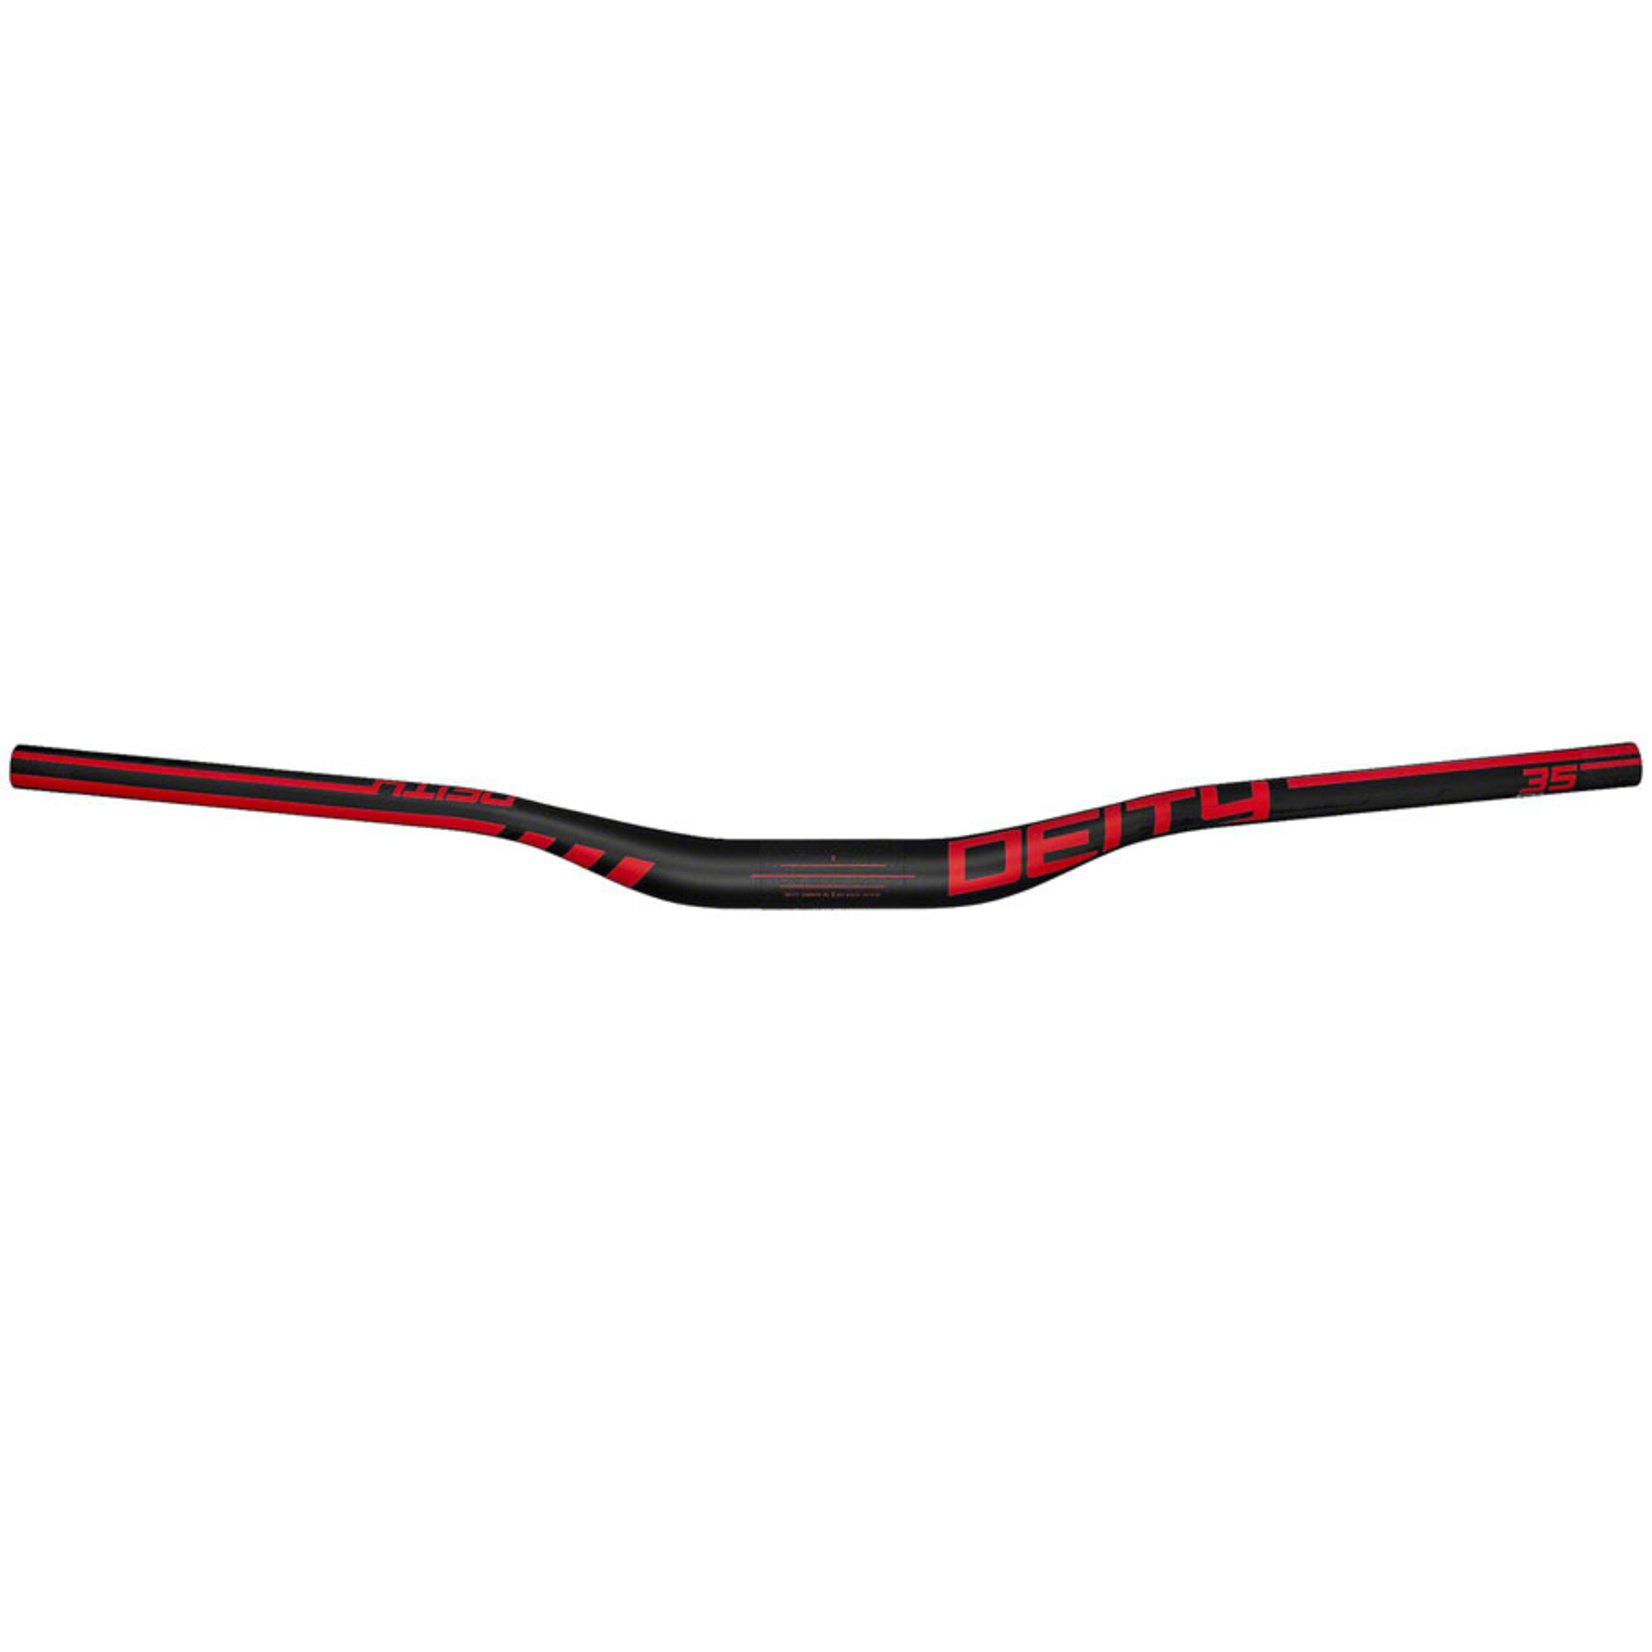 Deity Components Deity Speedway 35 Handlebar Carbon 30mm Rise 810mm Width 35mm Clamp